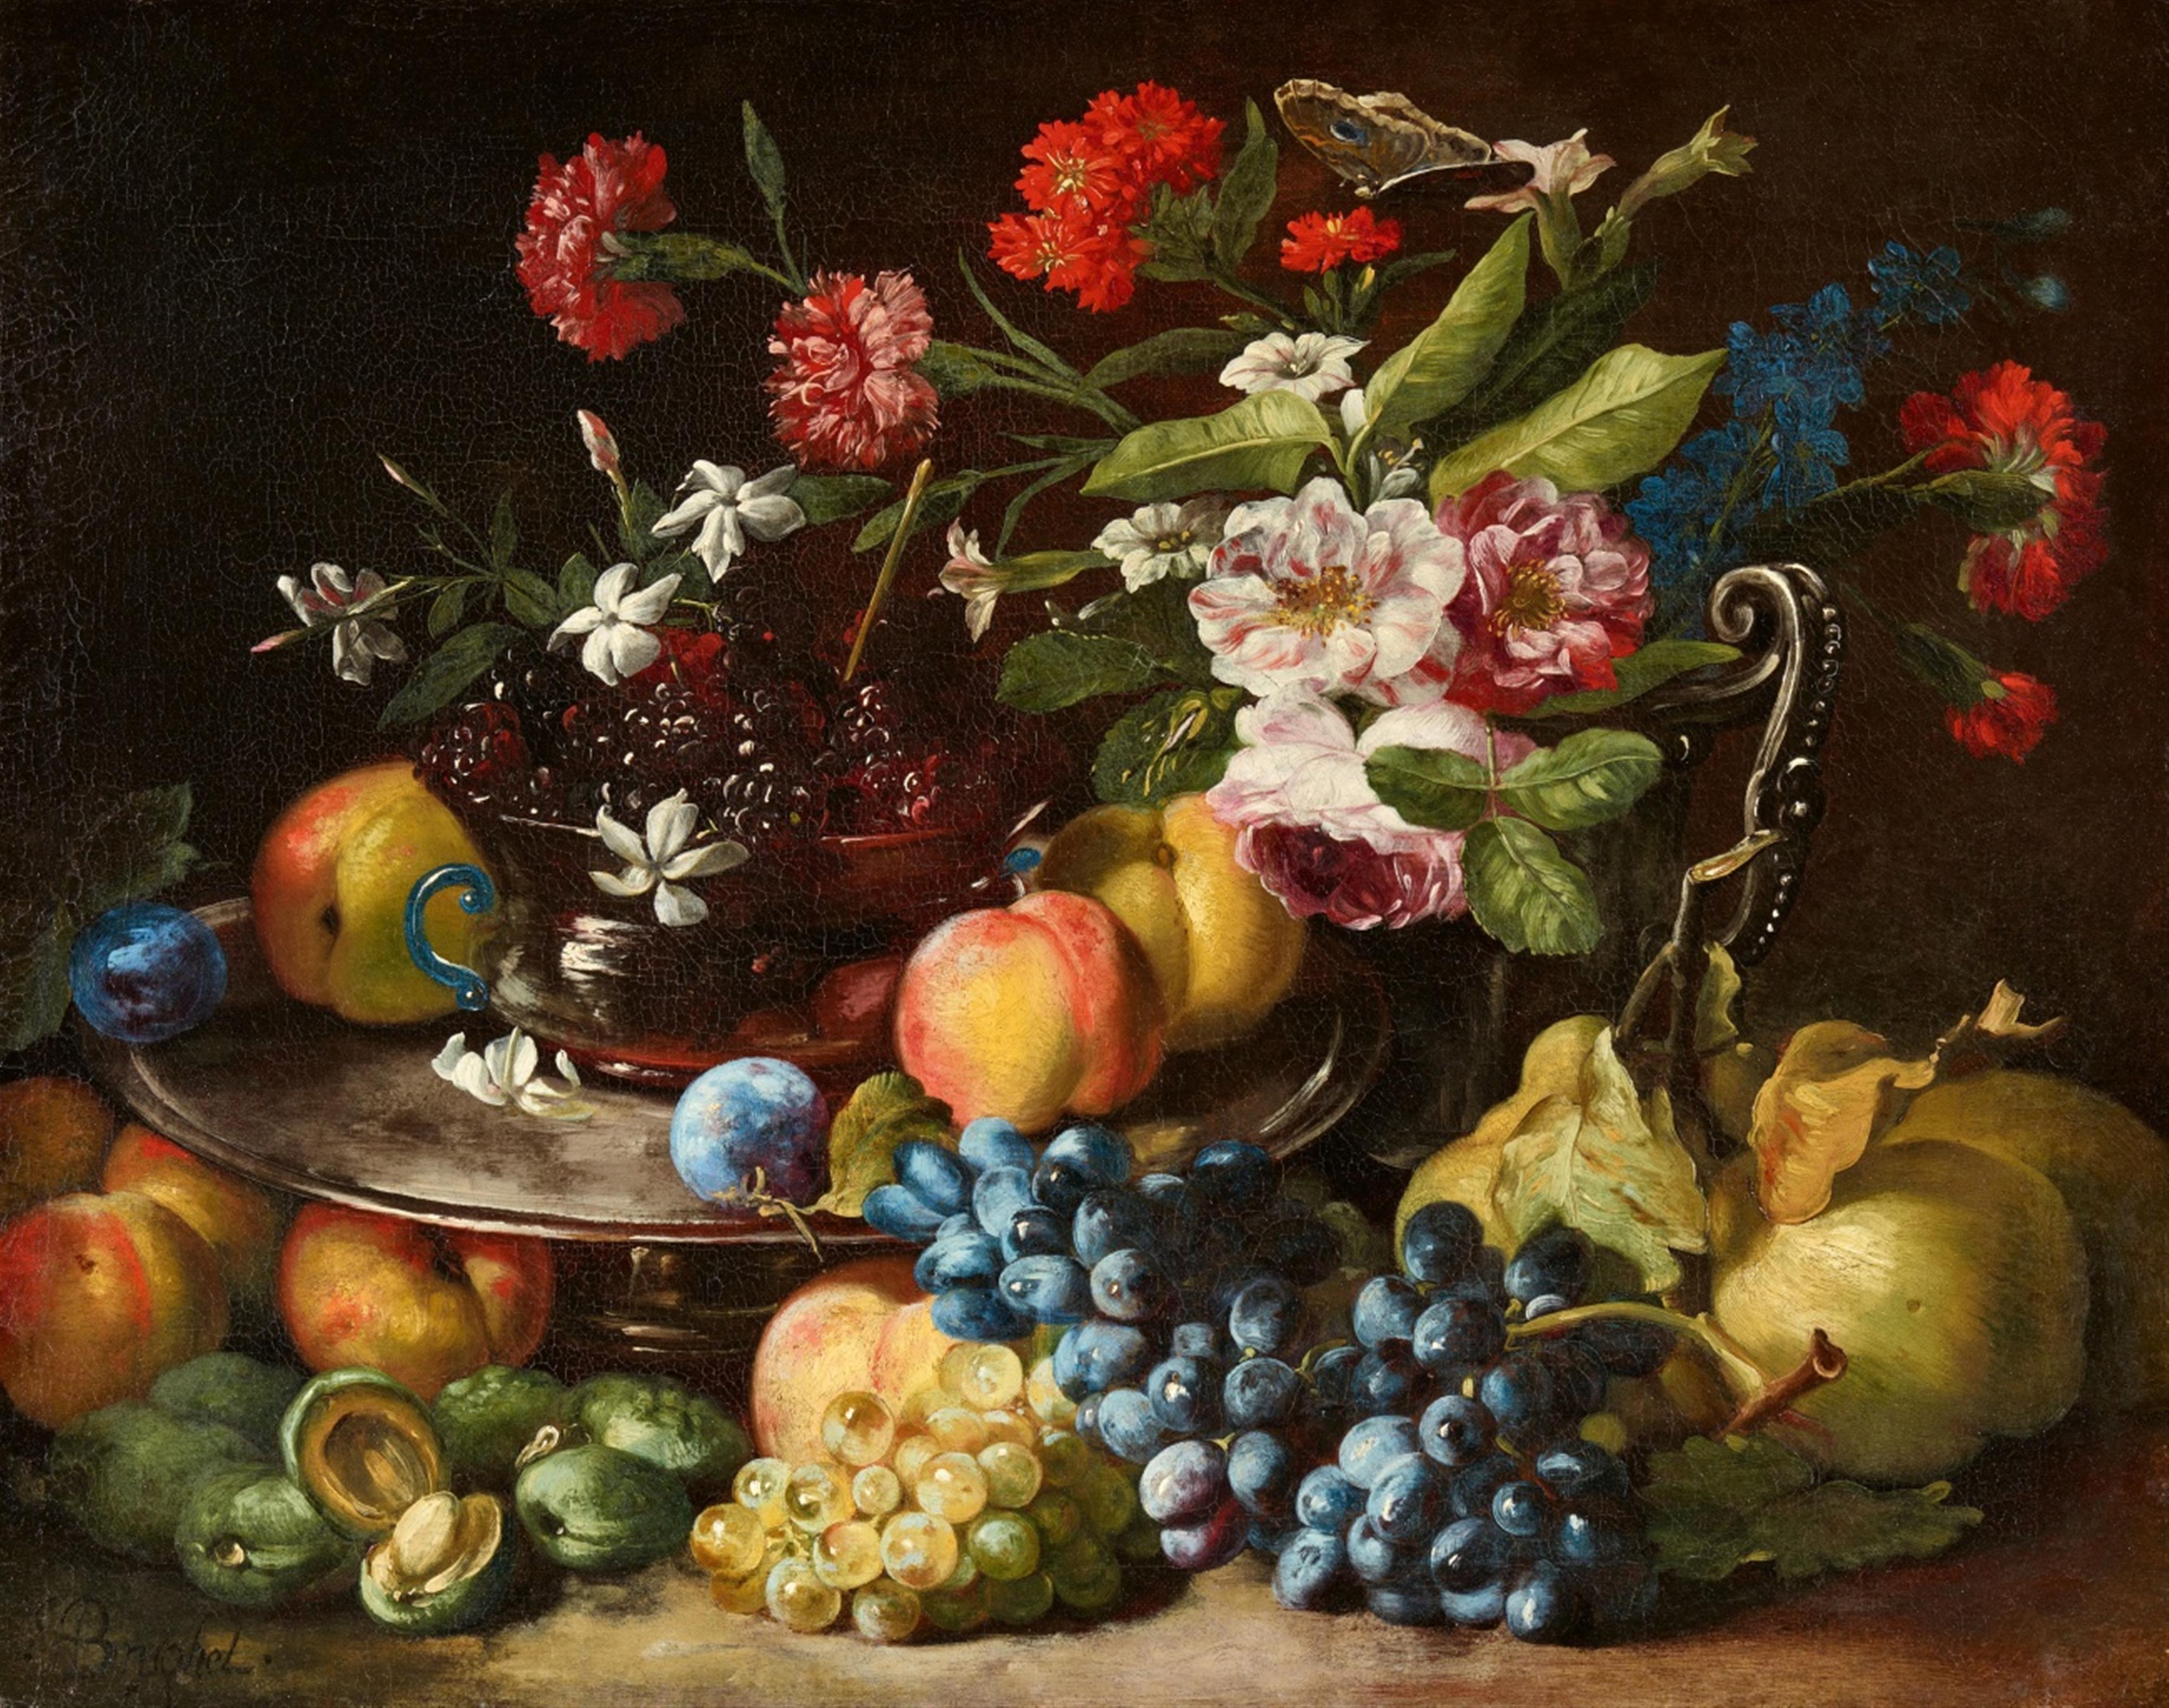 Abraham Brueghel - Still Life with Fruit and Flowers - image-1